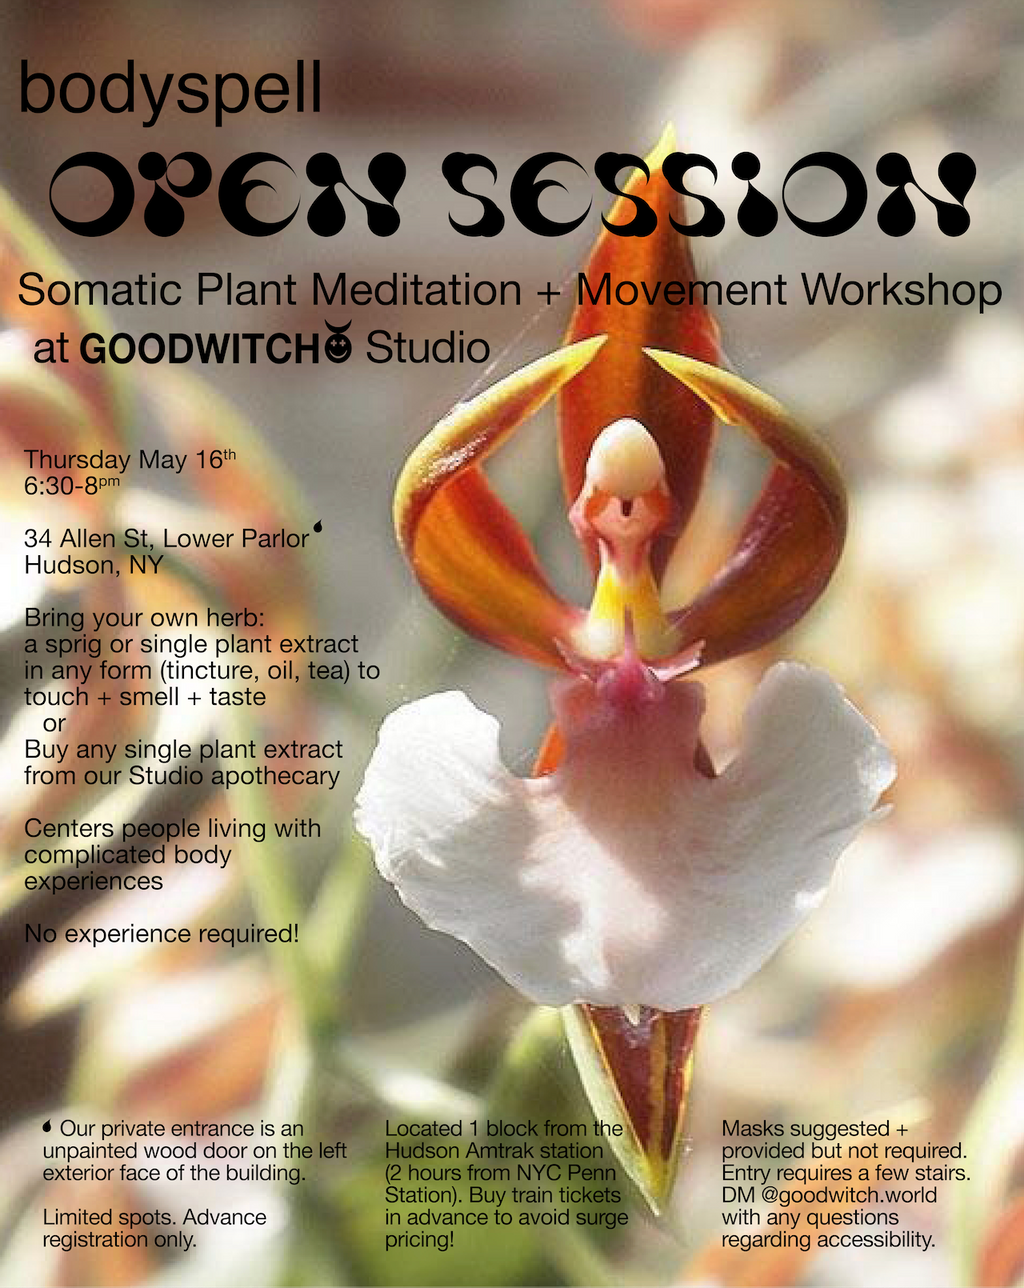 bodyspell: OPEN SESSION — somatic plant meditation + movement session at GOODWITCH Studio